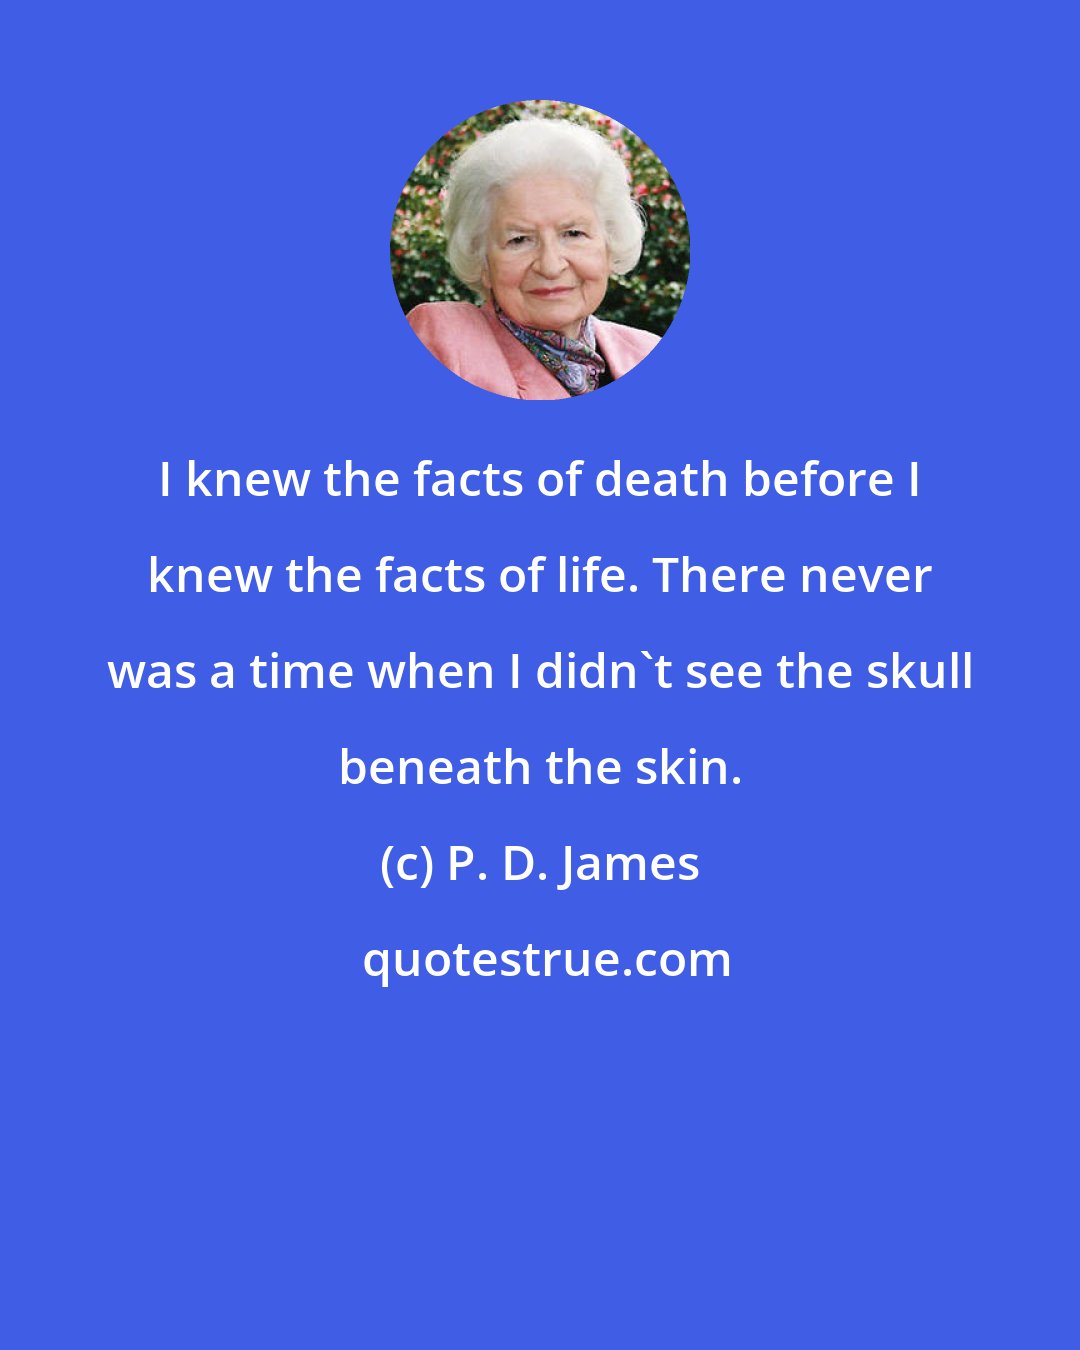 P. D. James: I knew the facts of death before I knew the facts of life. There never was a time when I didn't see the skull beneath the skin.